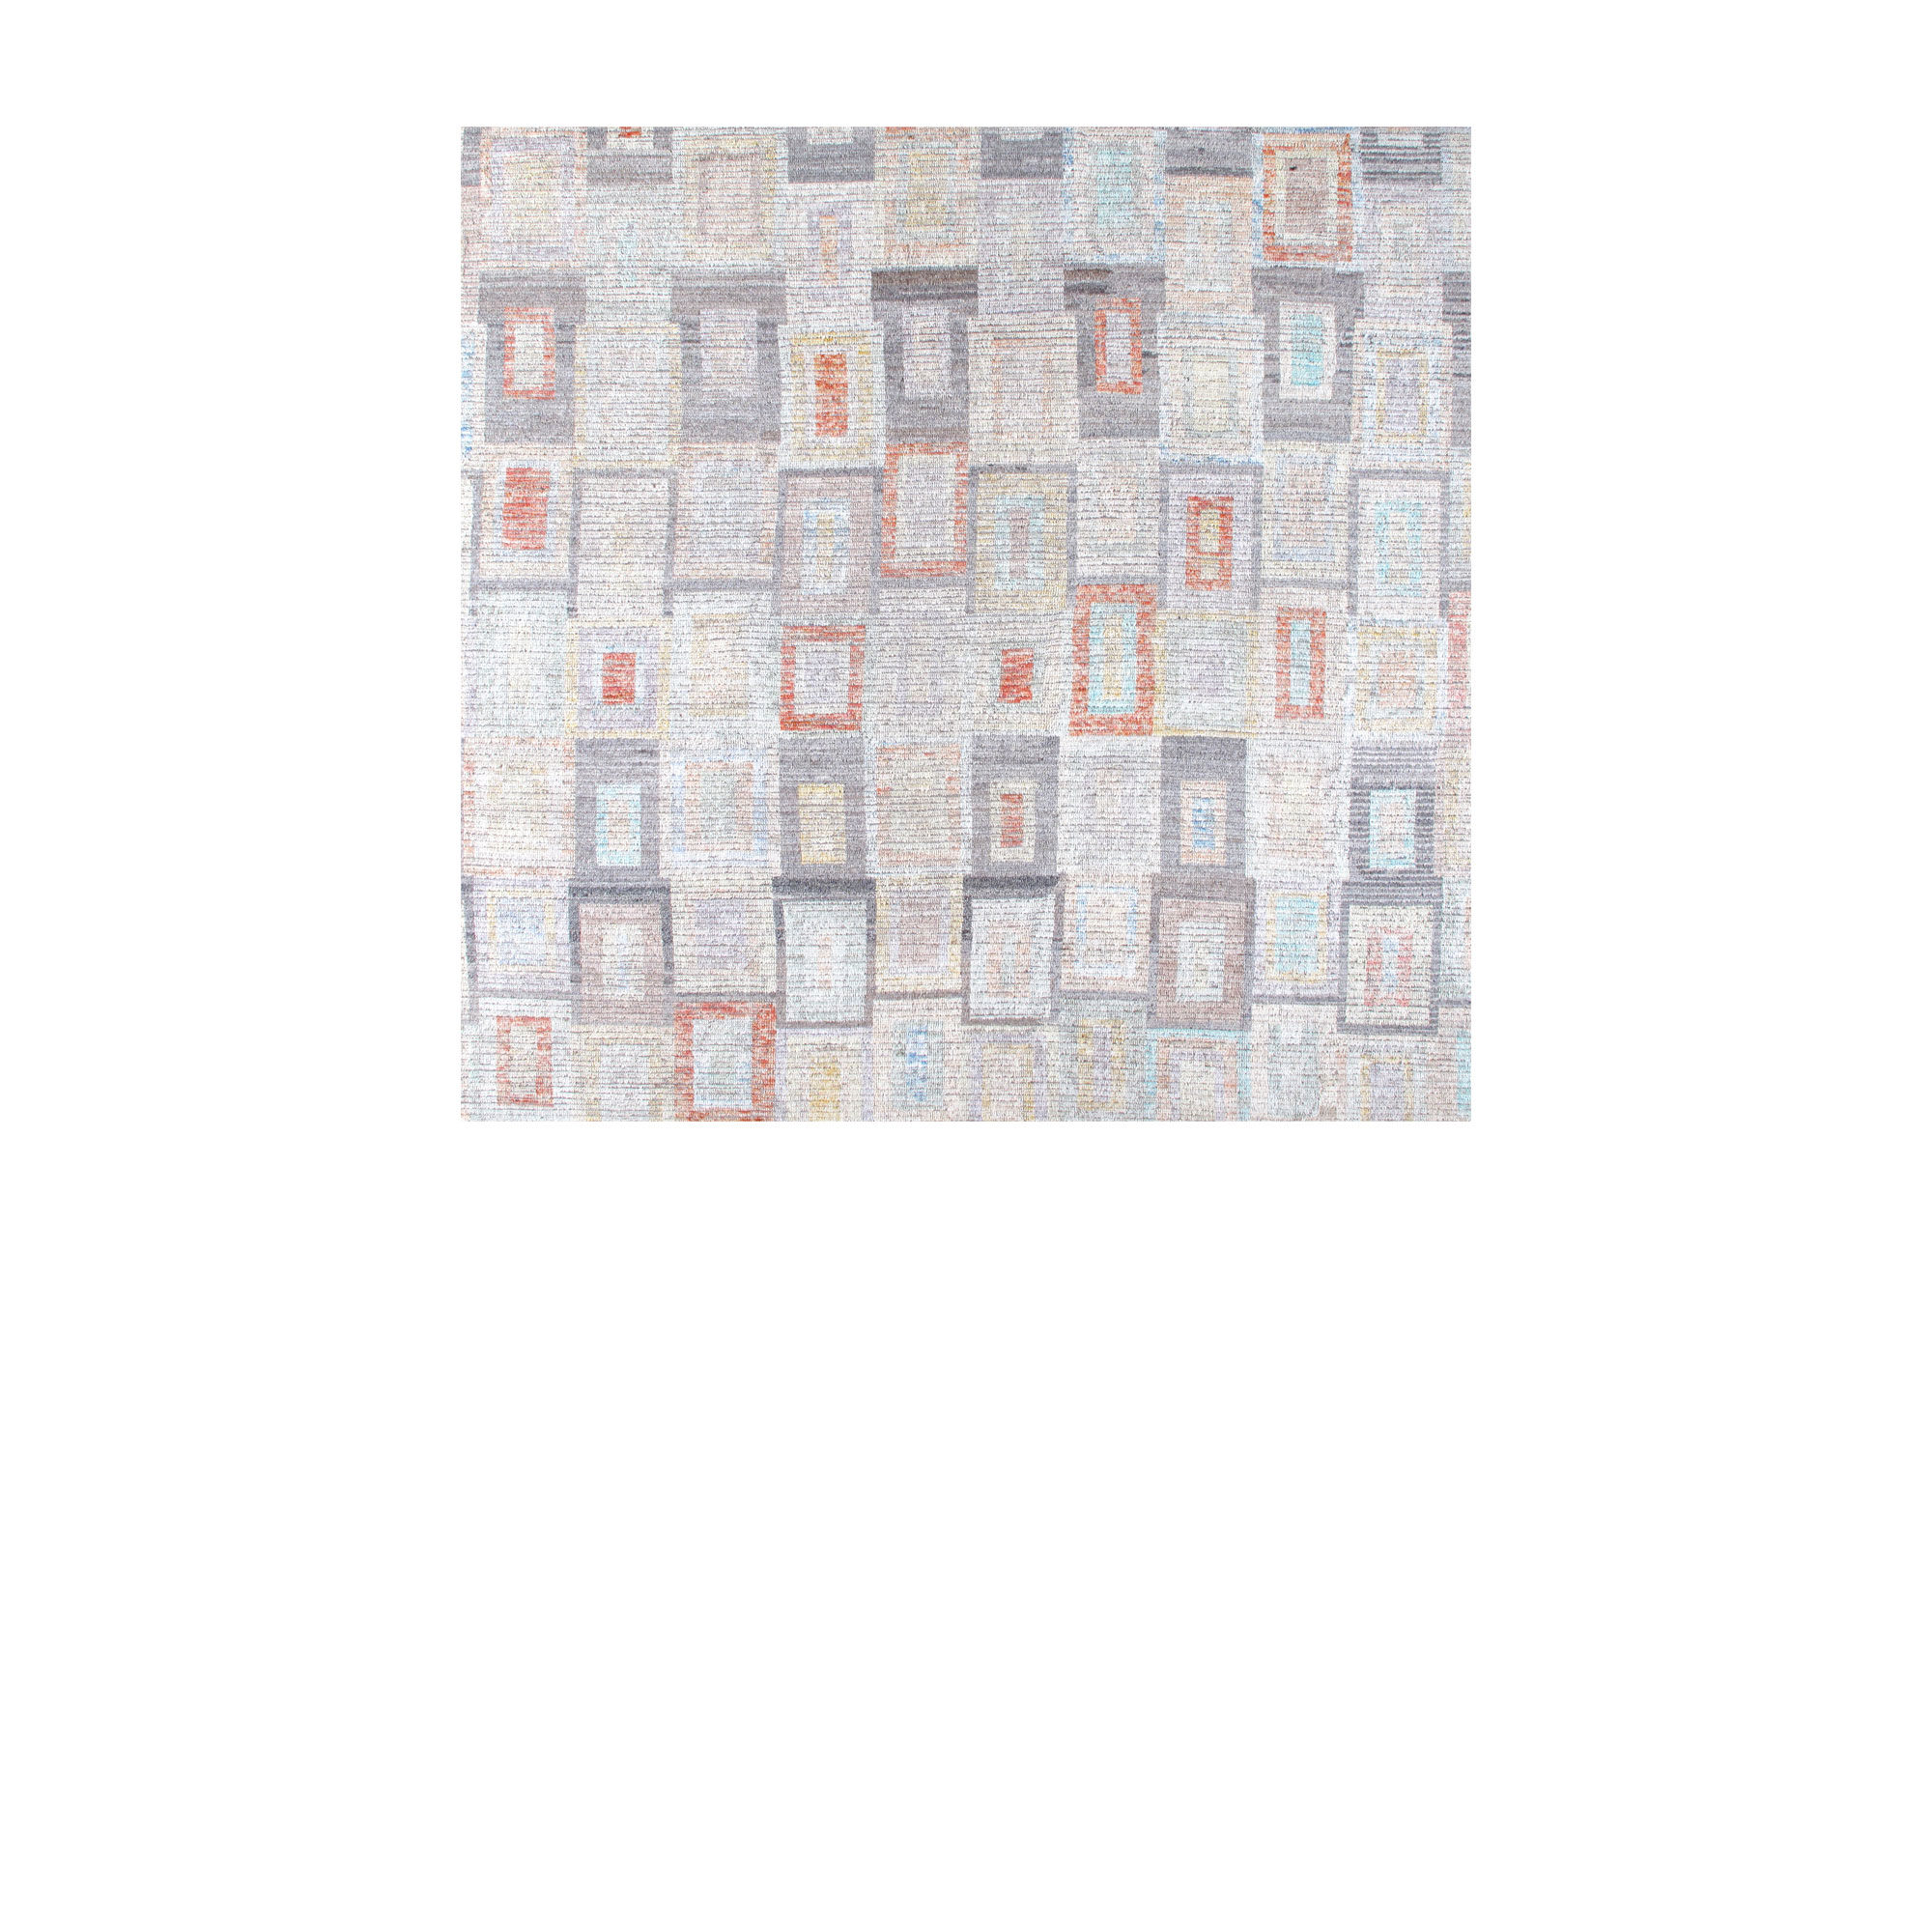 Pastel rug is a modern hand-knotted rug made from 100% wool and a soft-hued palette of colors.  